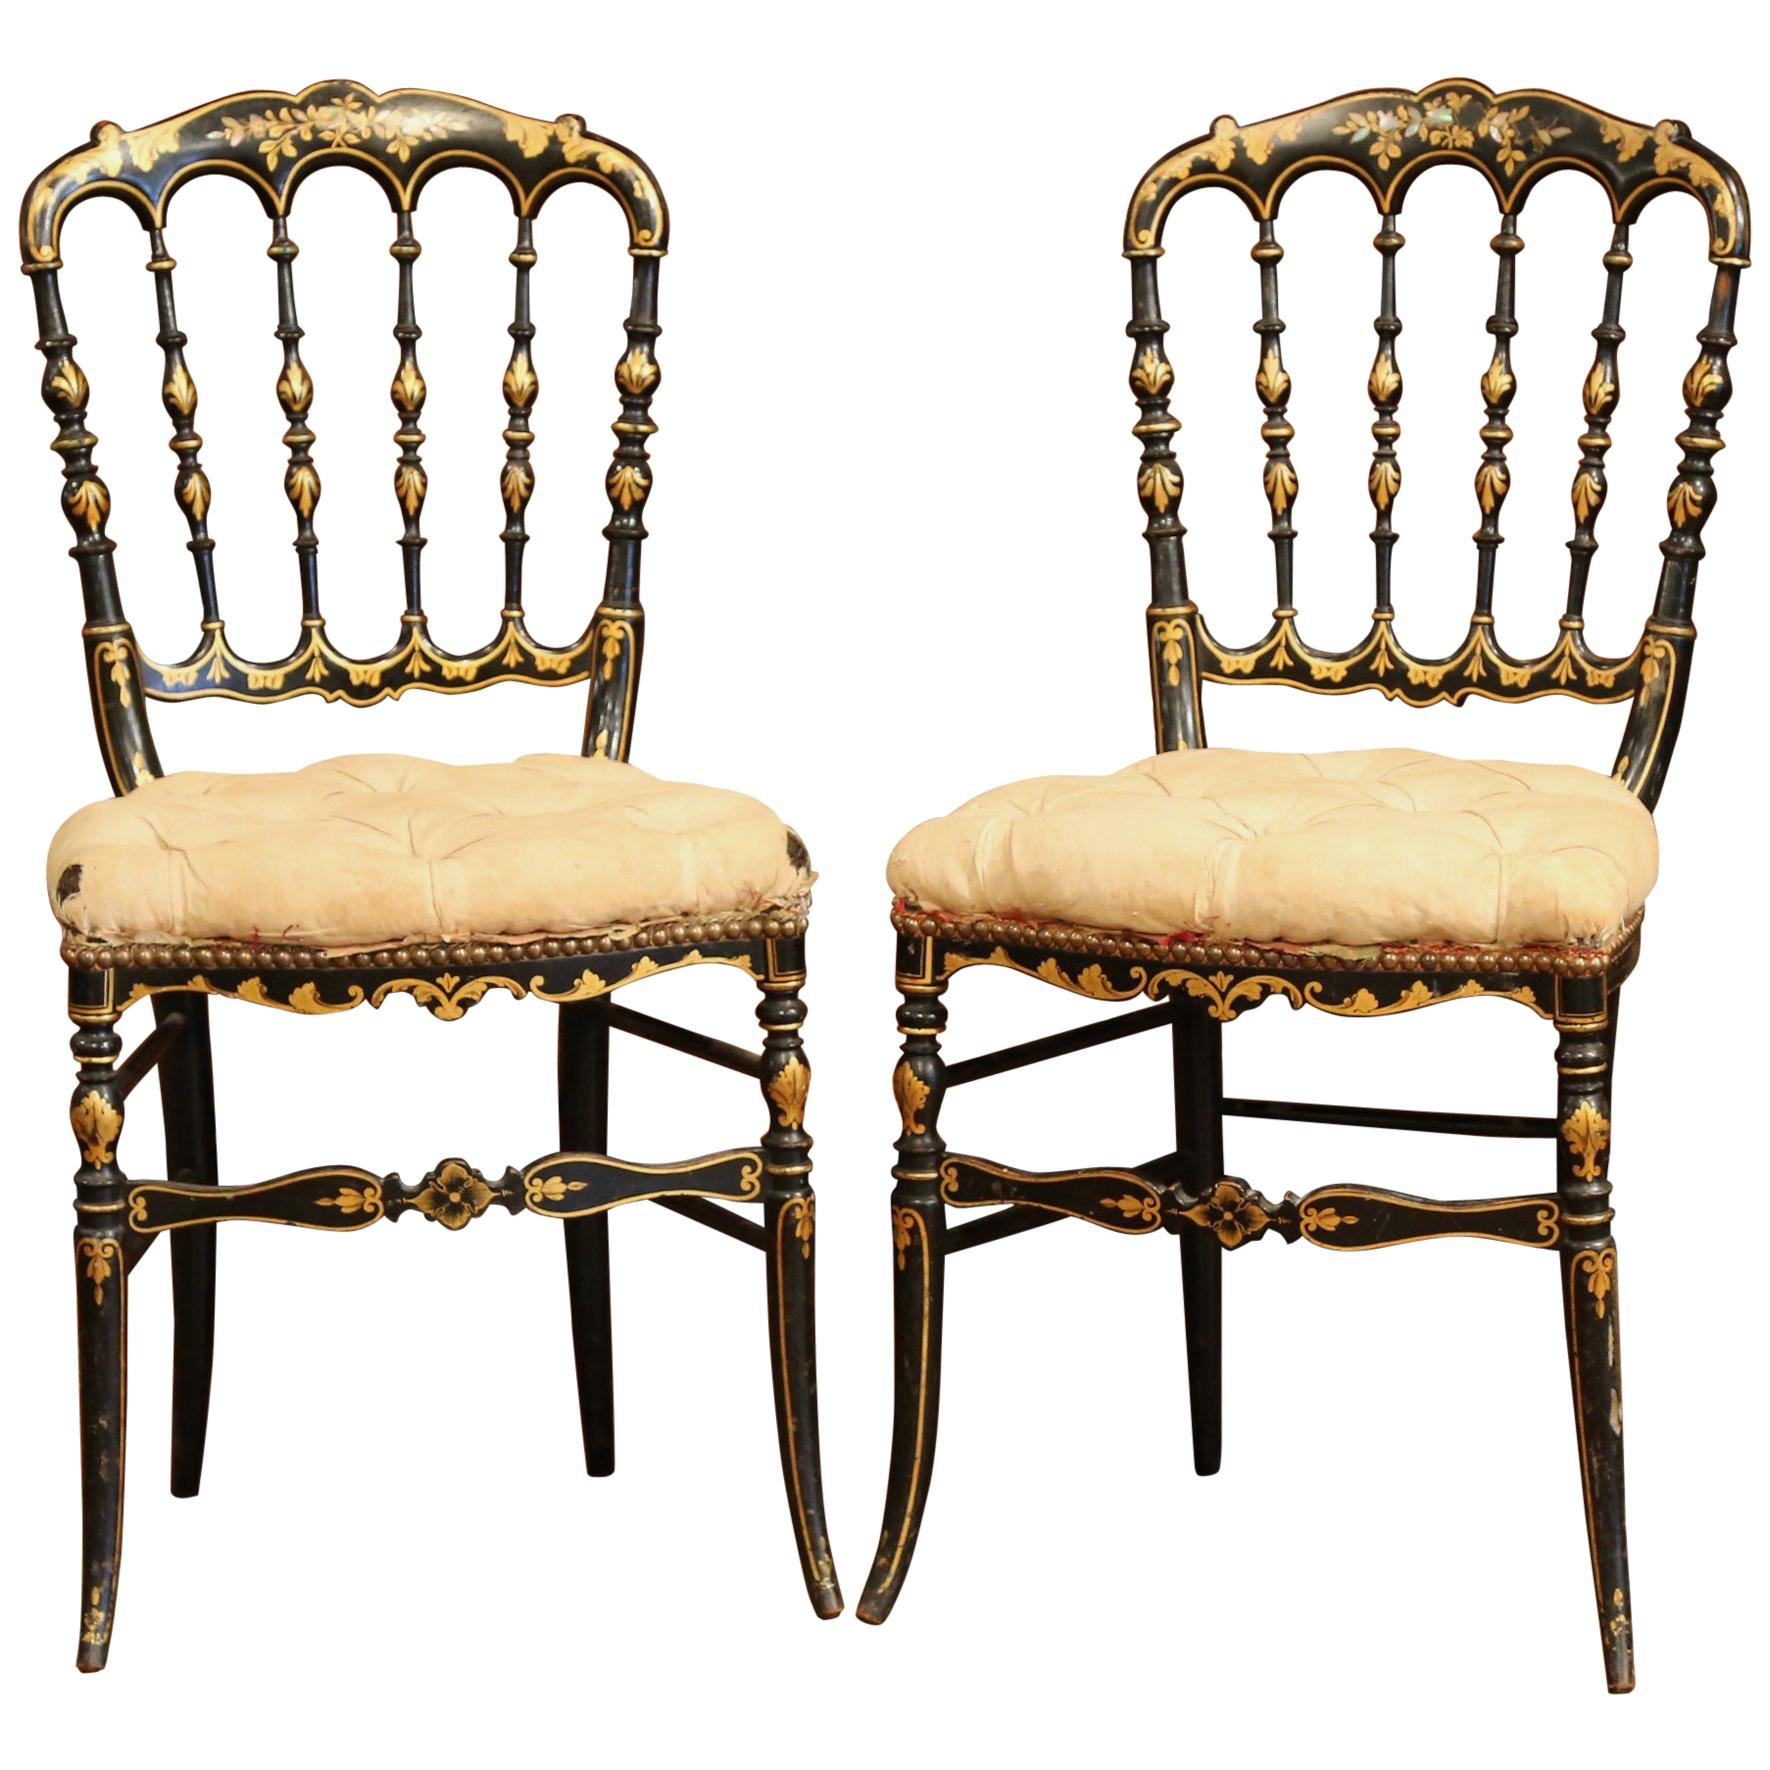 Pair of 19th Century French Napoleon III Black Lacquered Chairs with Gilt Decor